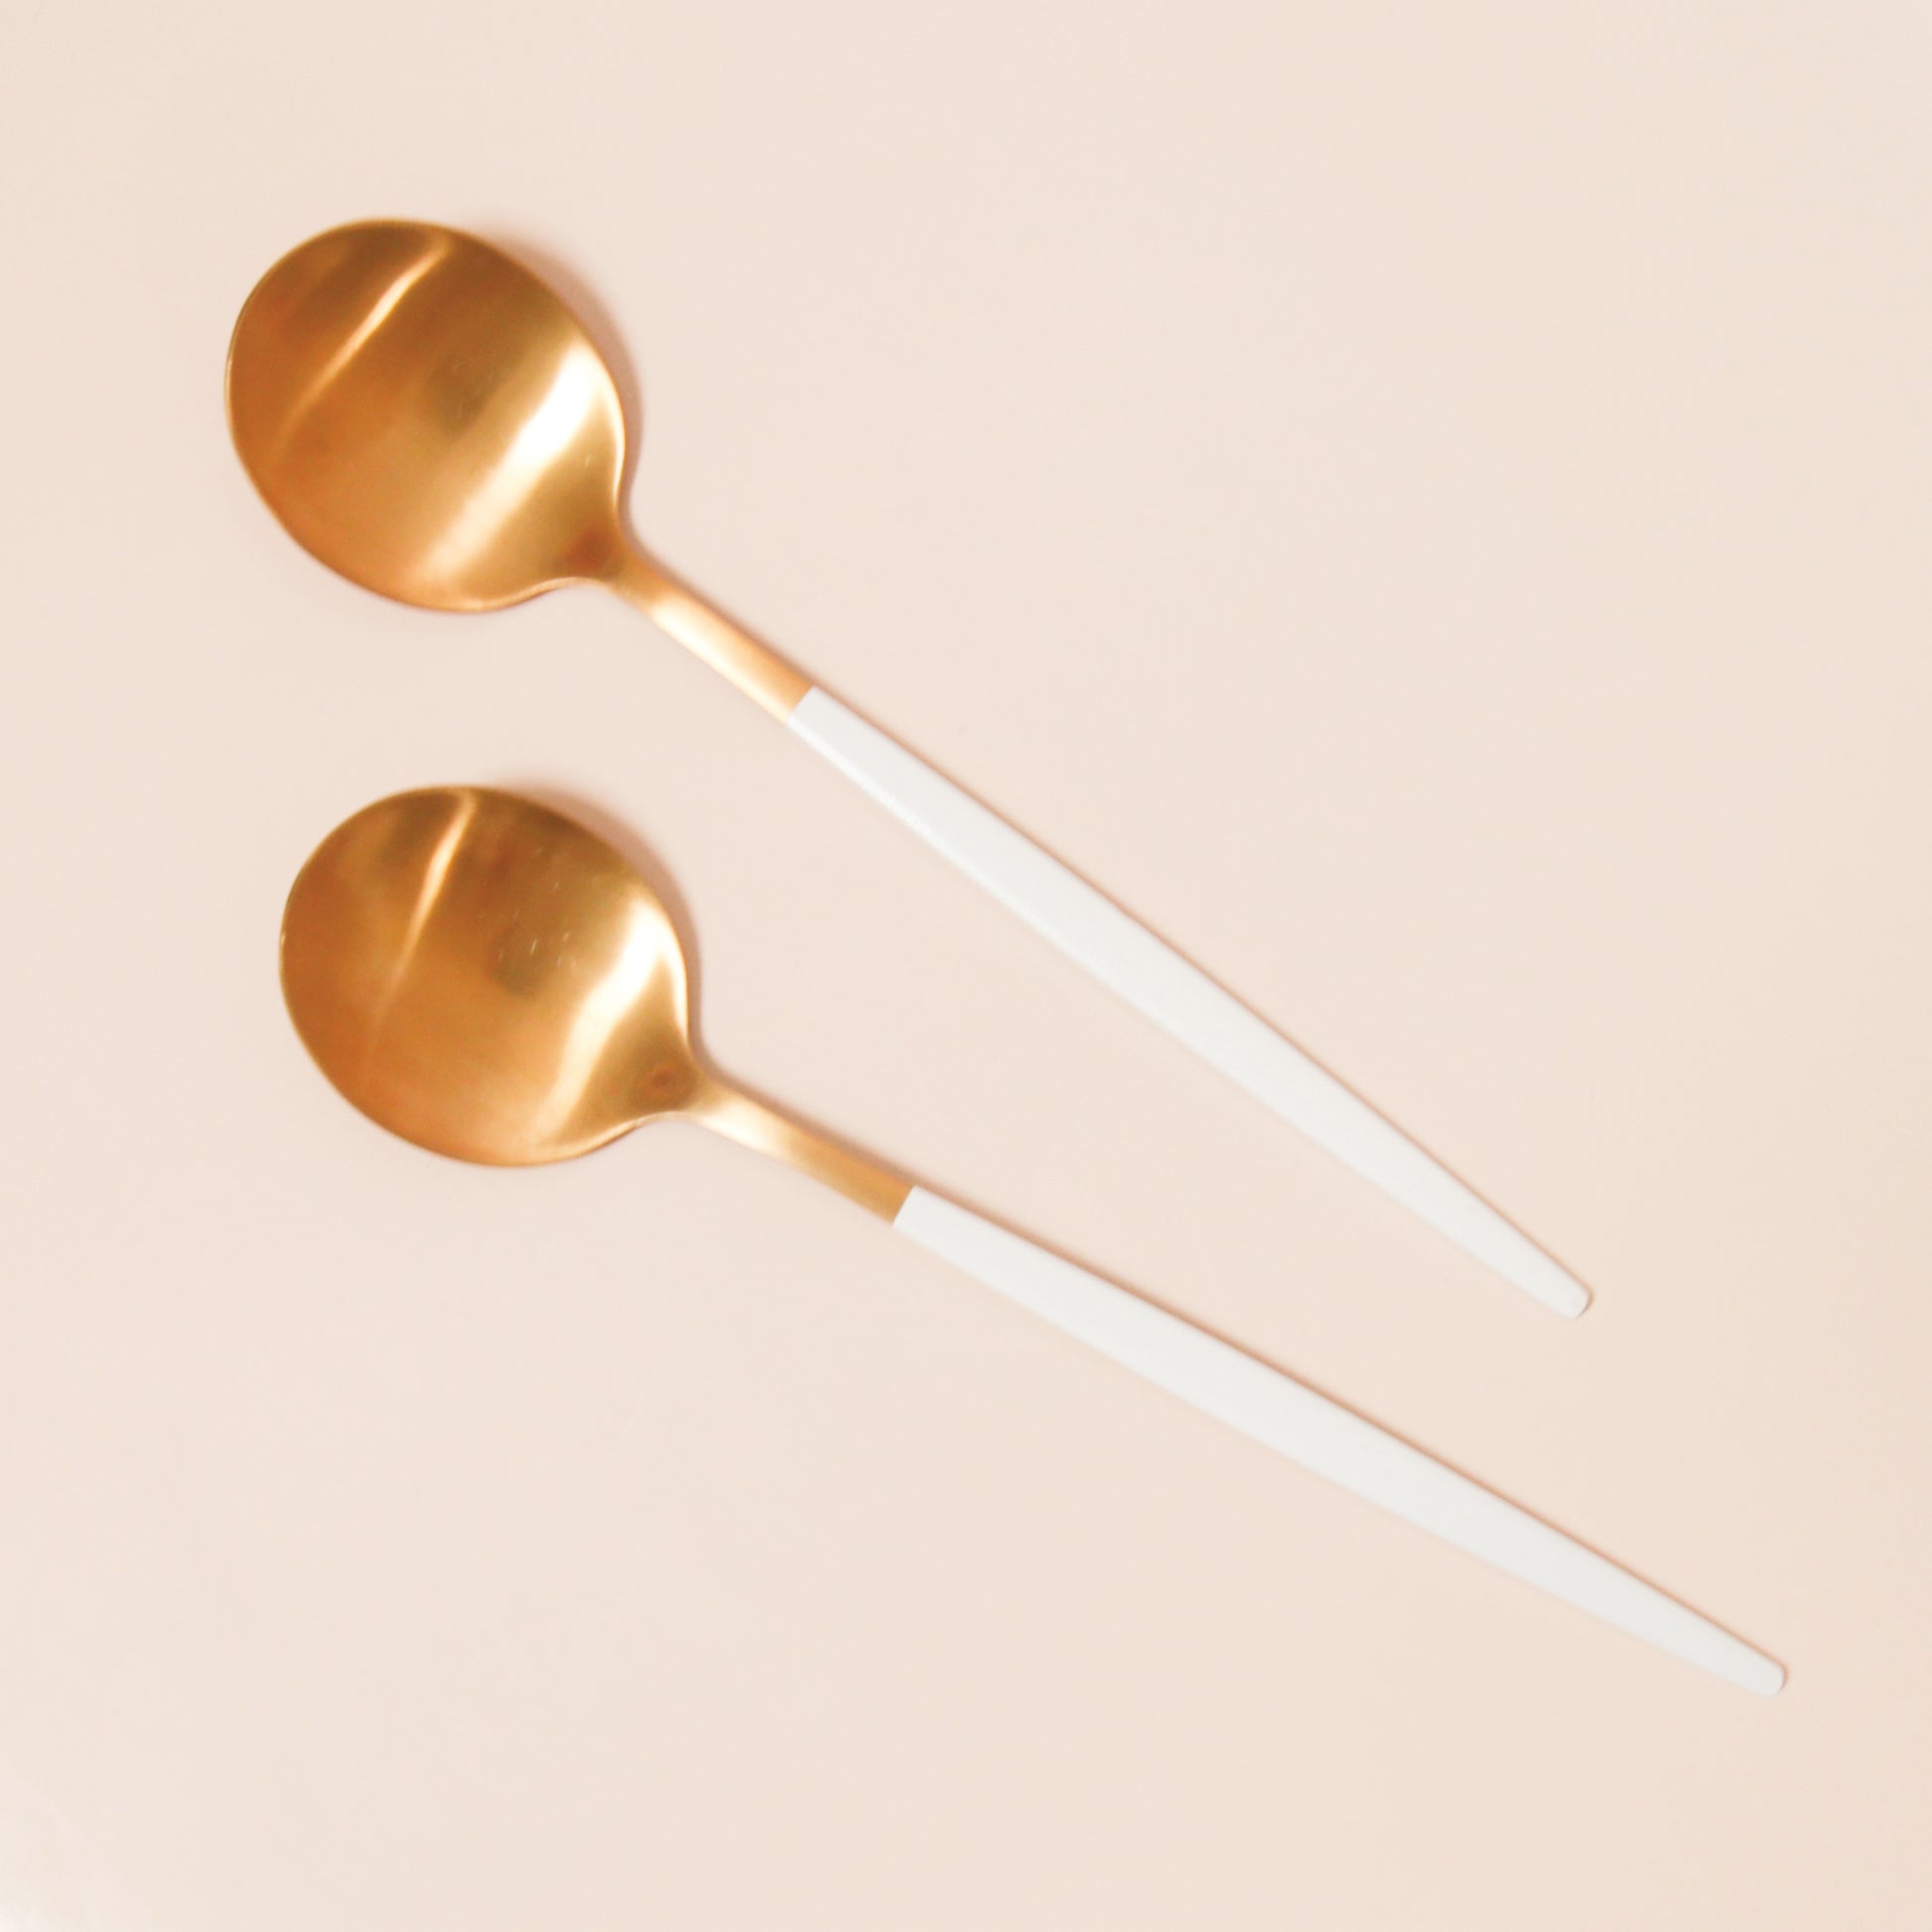 On a cream background is two brass planting spoons with a white handle that has a pointed end.